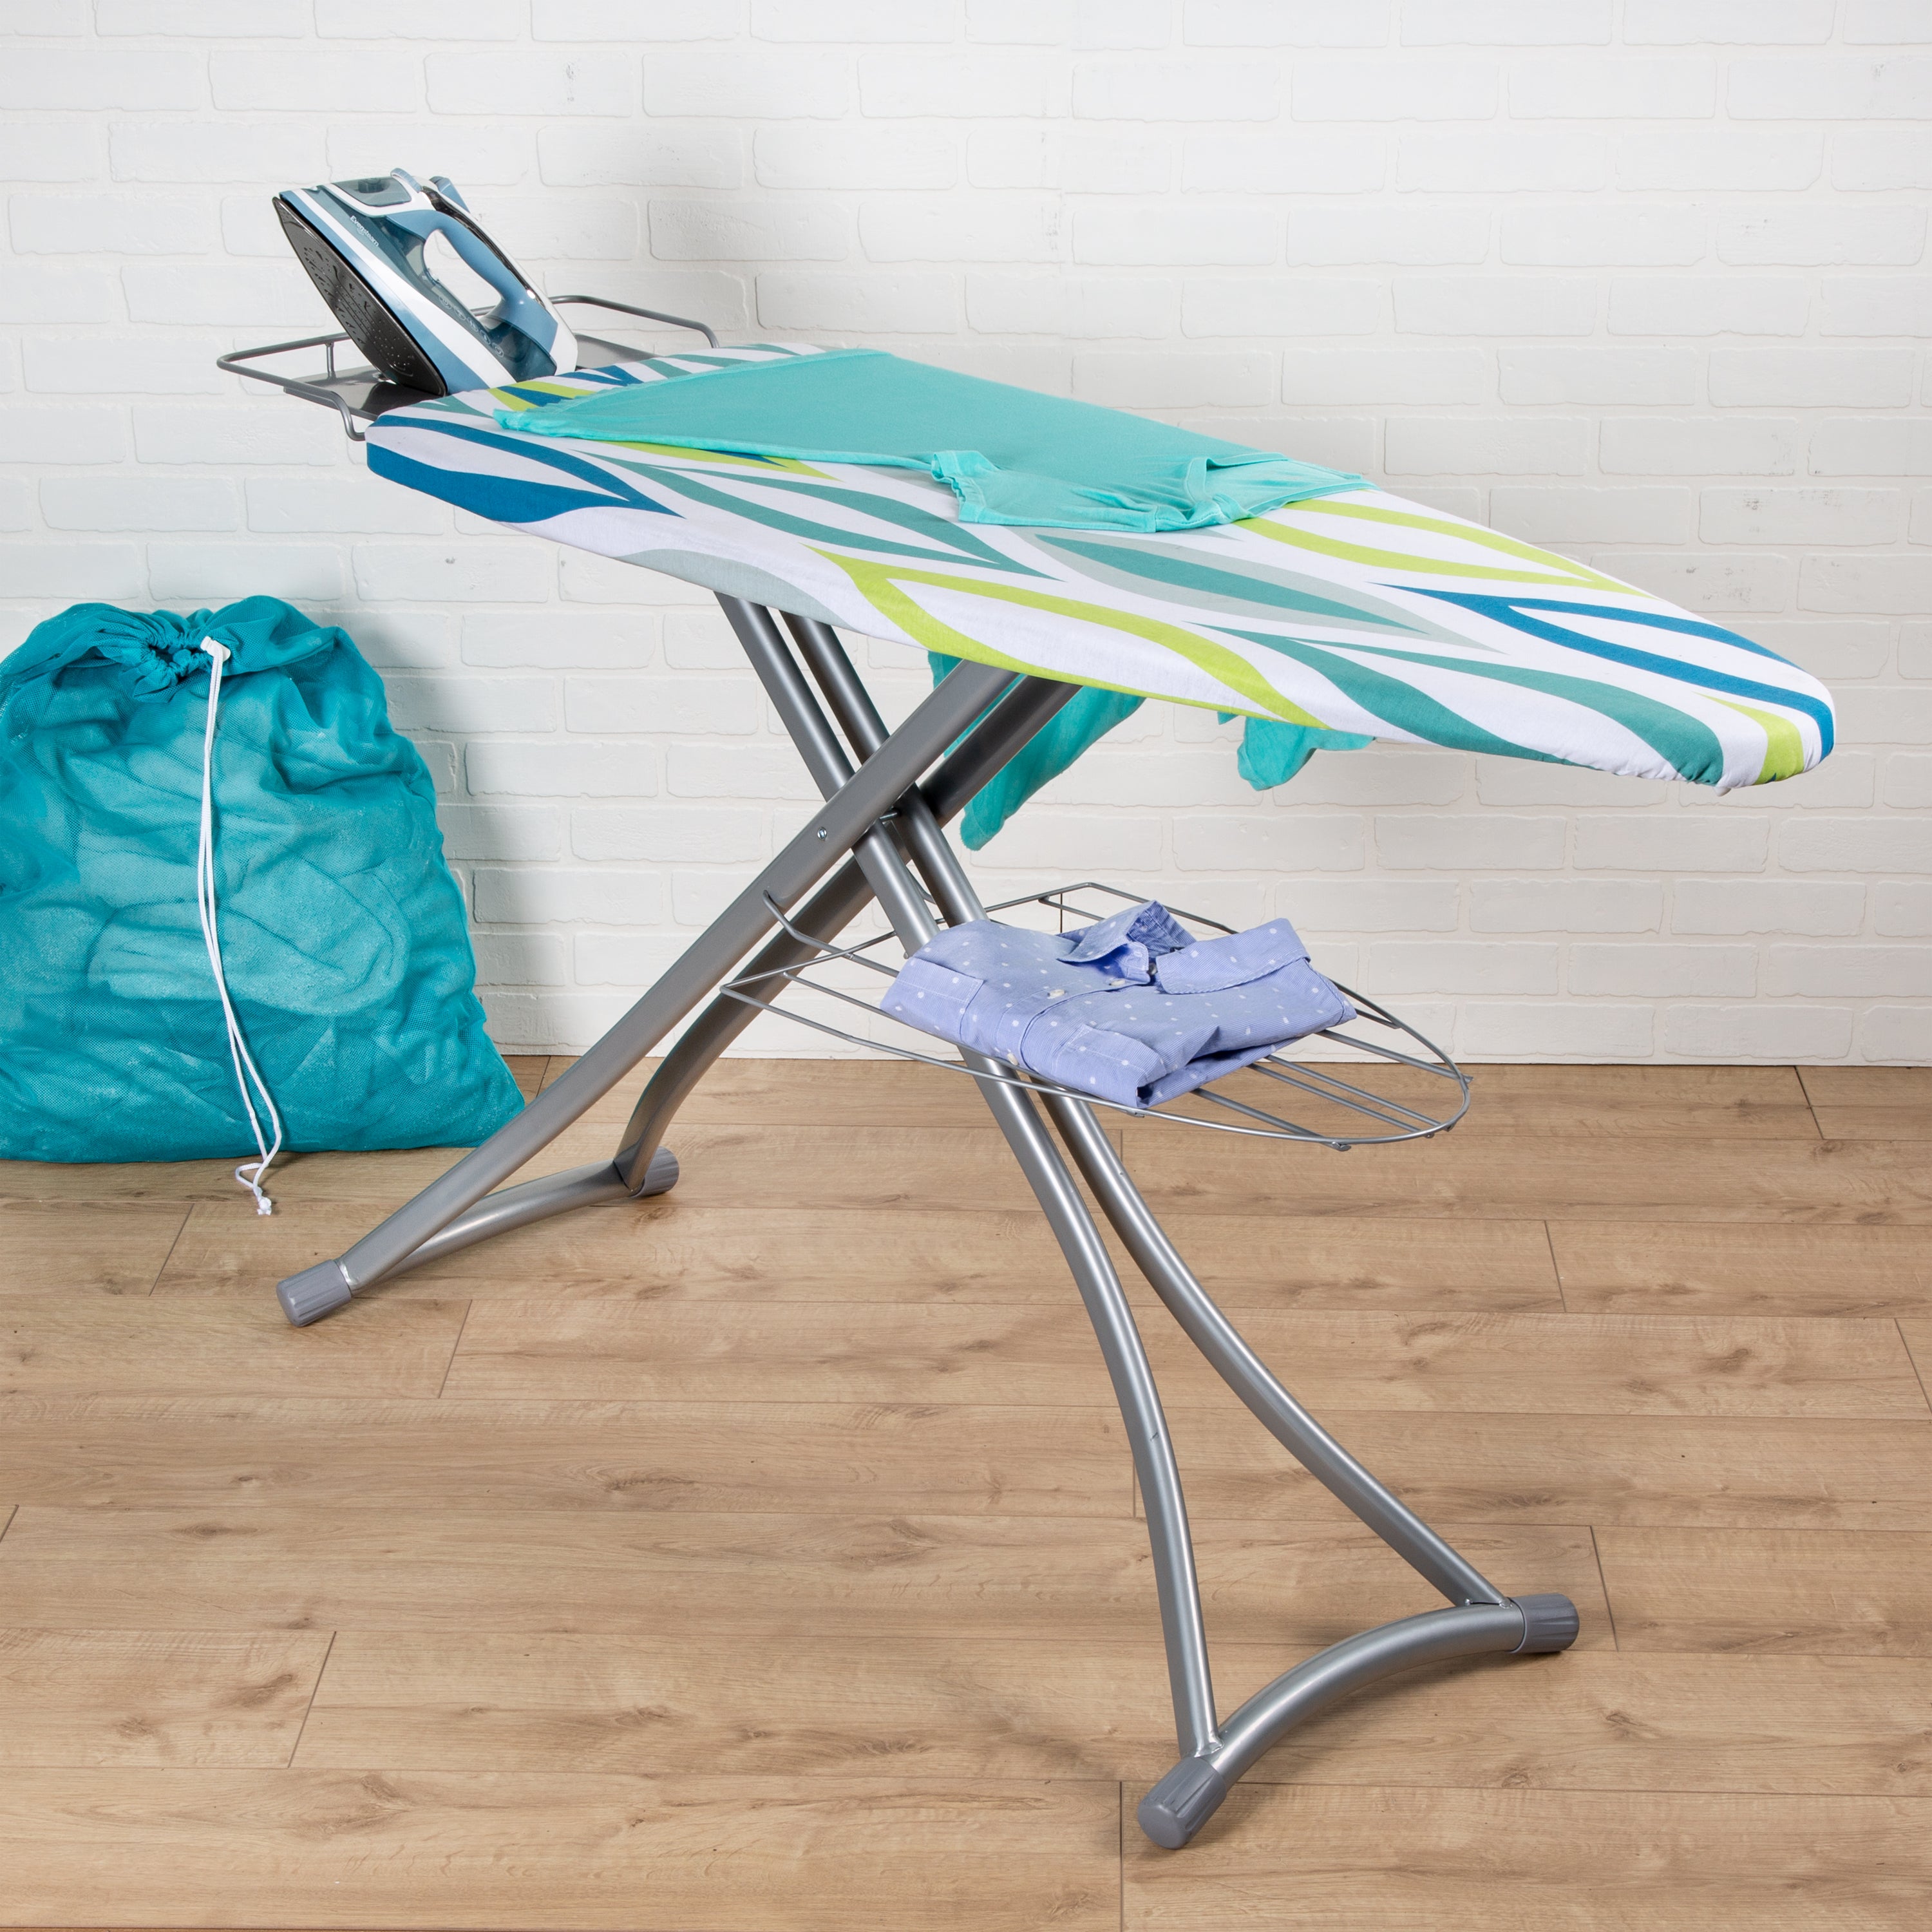 Household Ironing Board Ironing Mat For Table Top Dry-cleaning